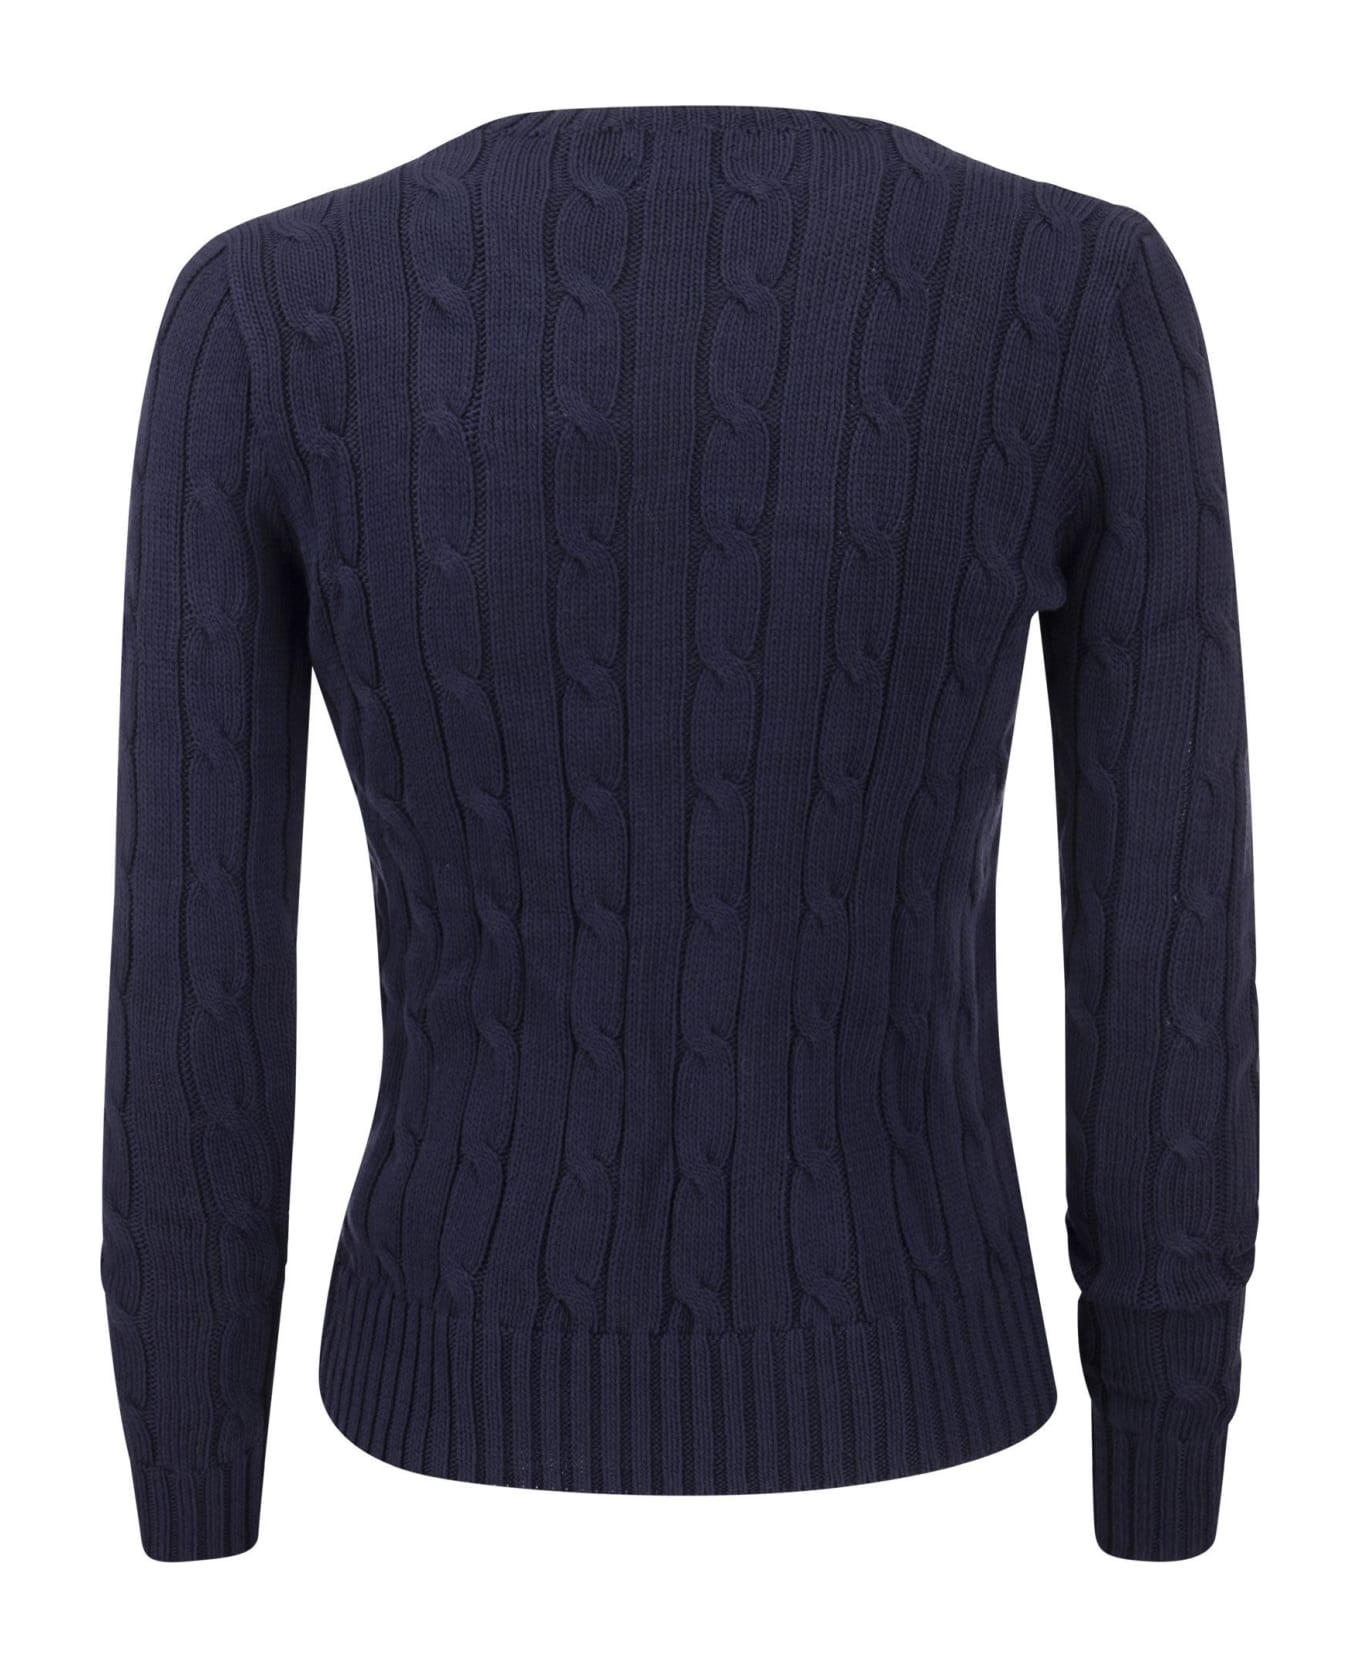 Polo Ralph Lauren Cable Knit Sweater - Navy Blue